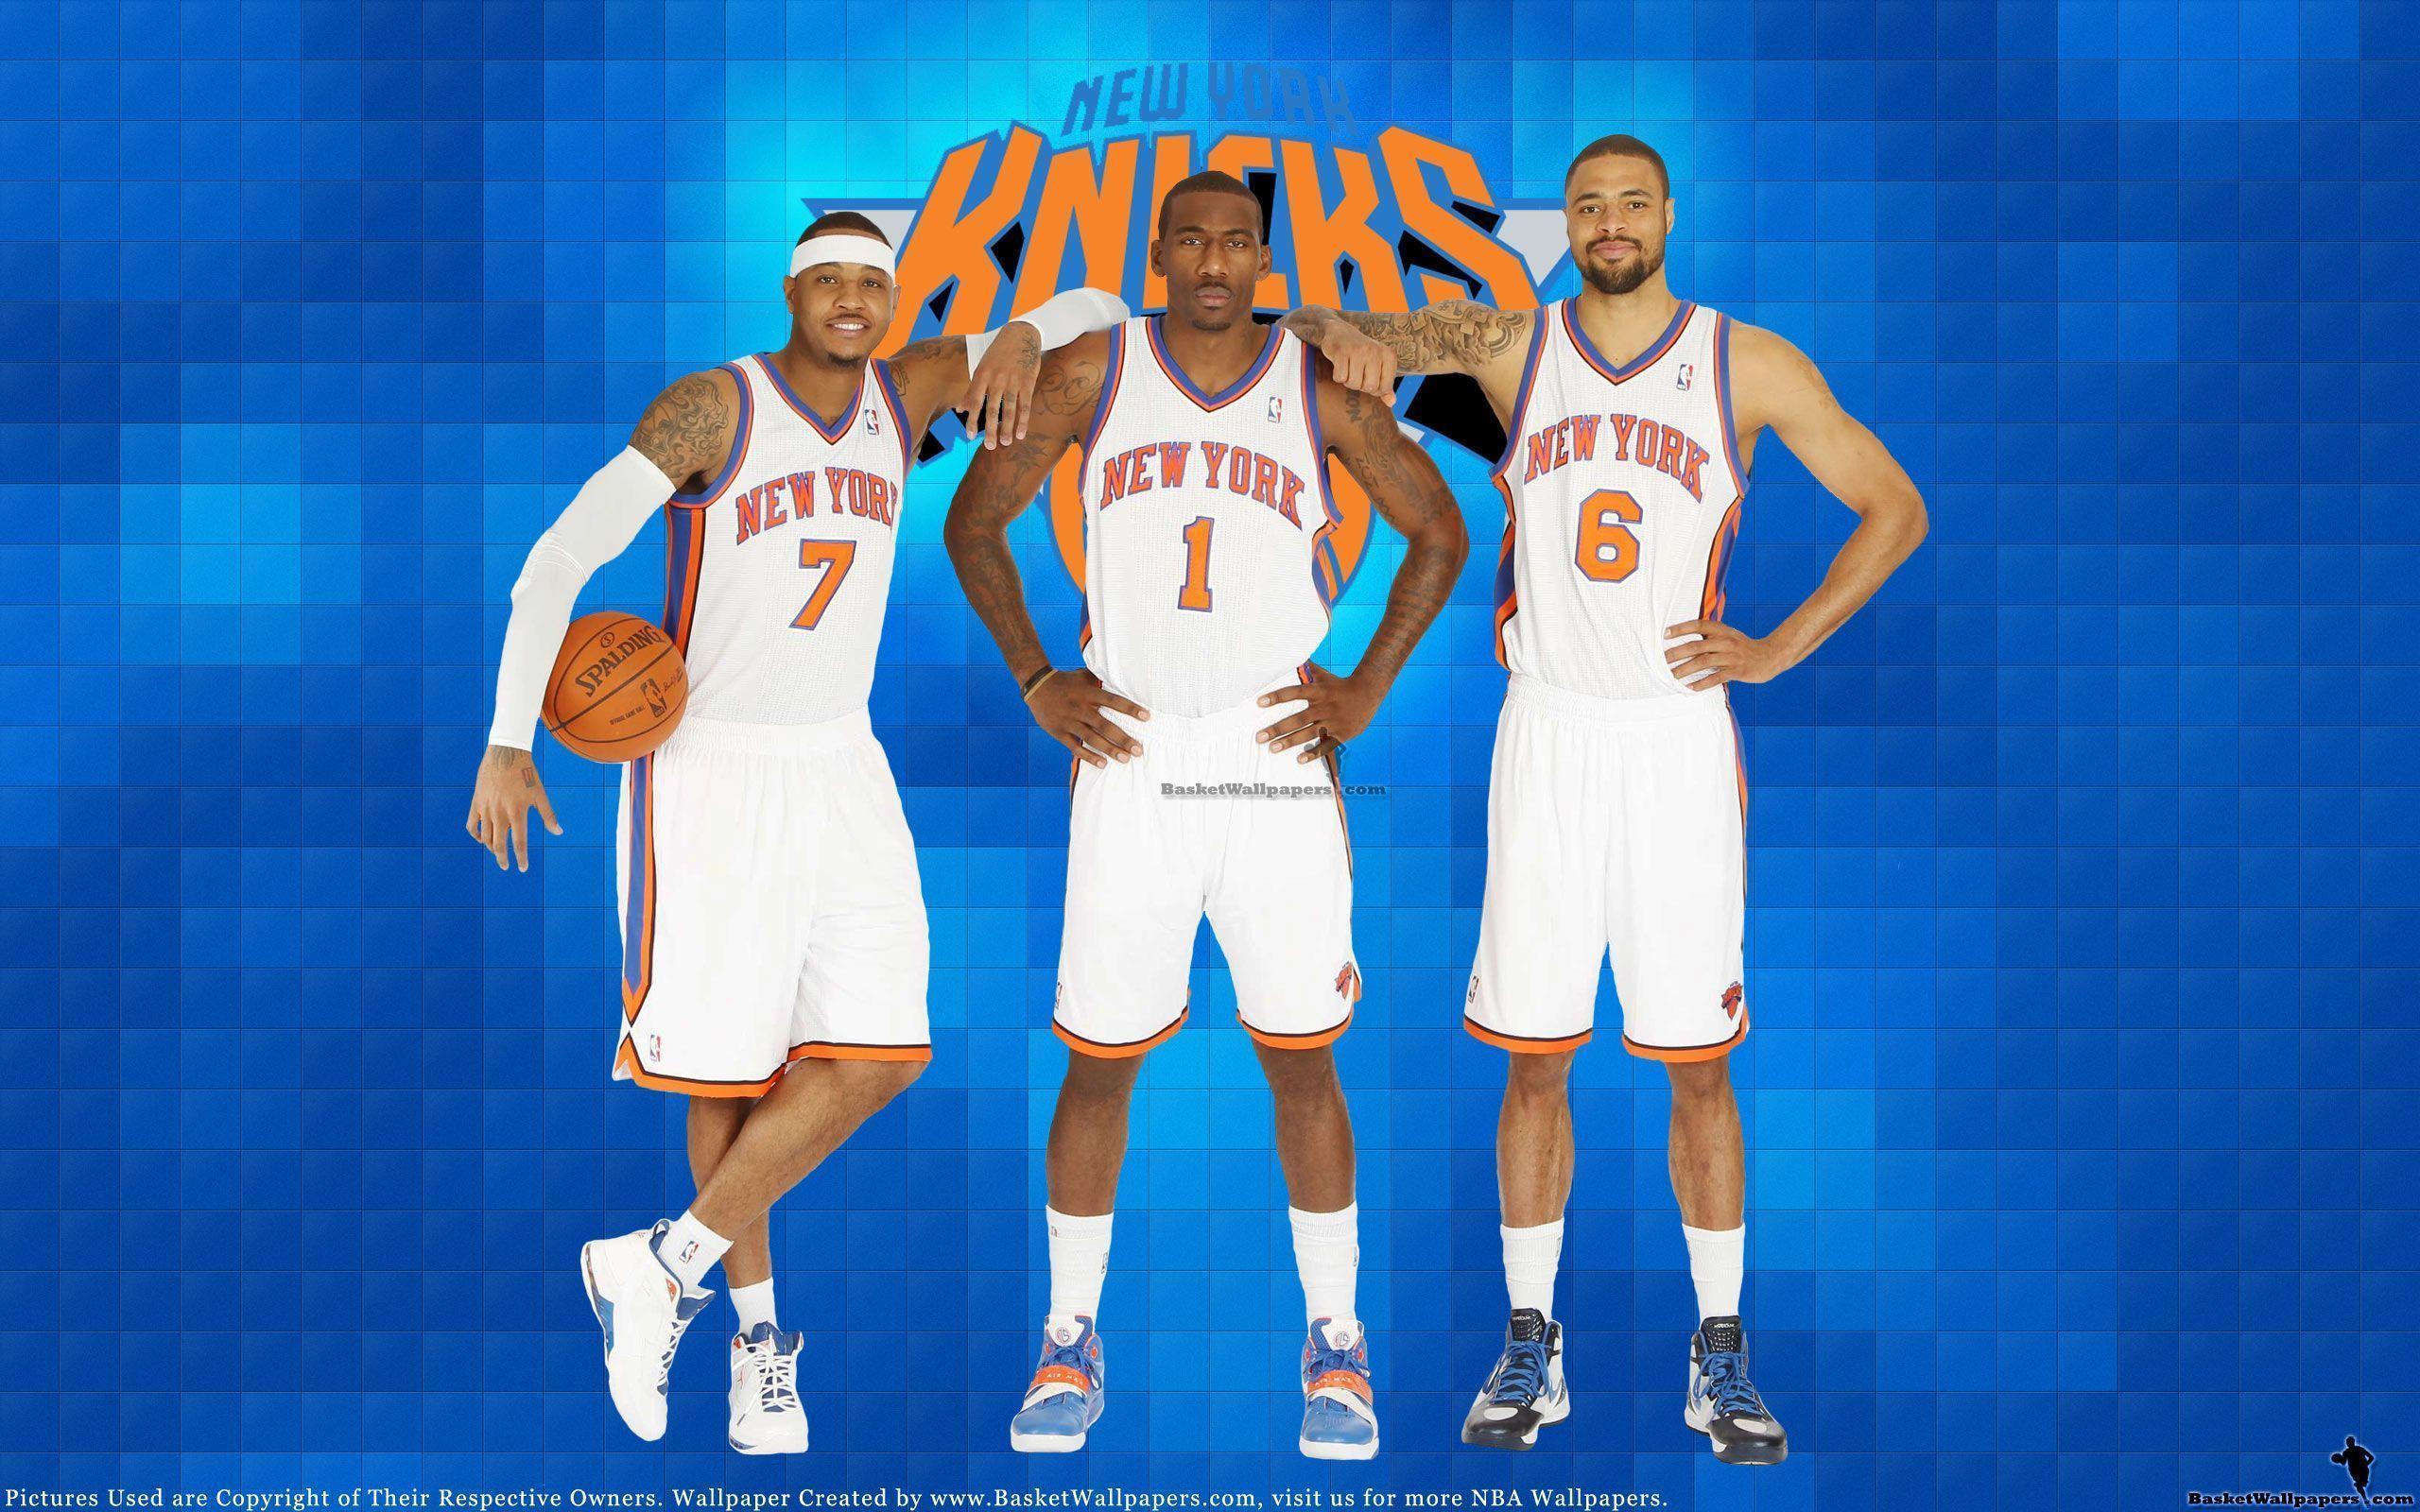 image about Stuff to Buy. New York Knicks